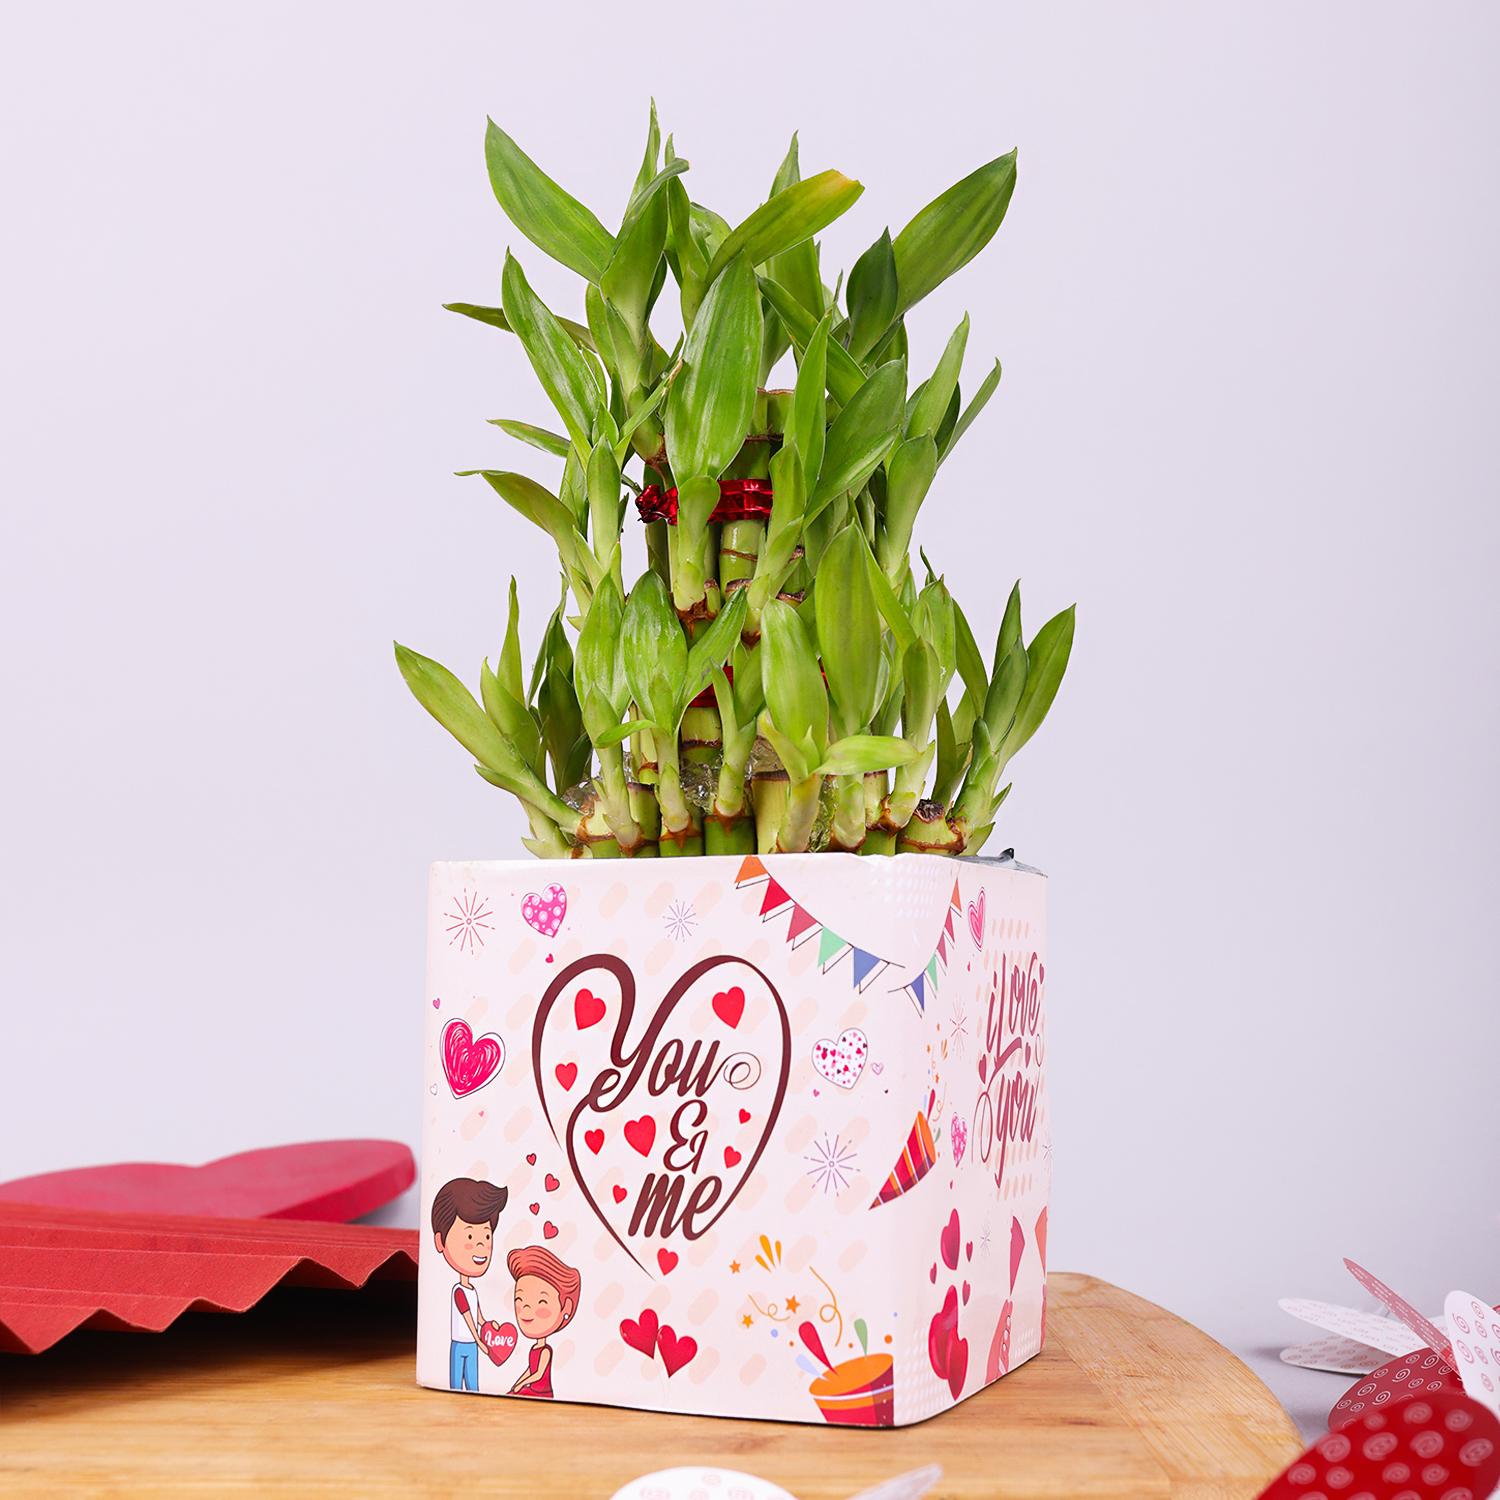 Lucky Bamboo Care Guide to Make Your Plant Thrive | LoveToKnow